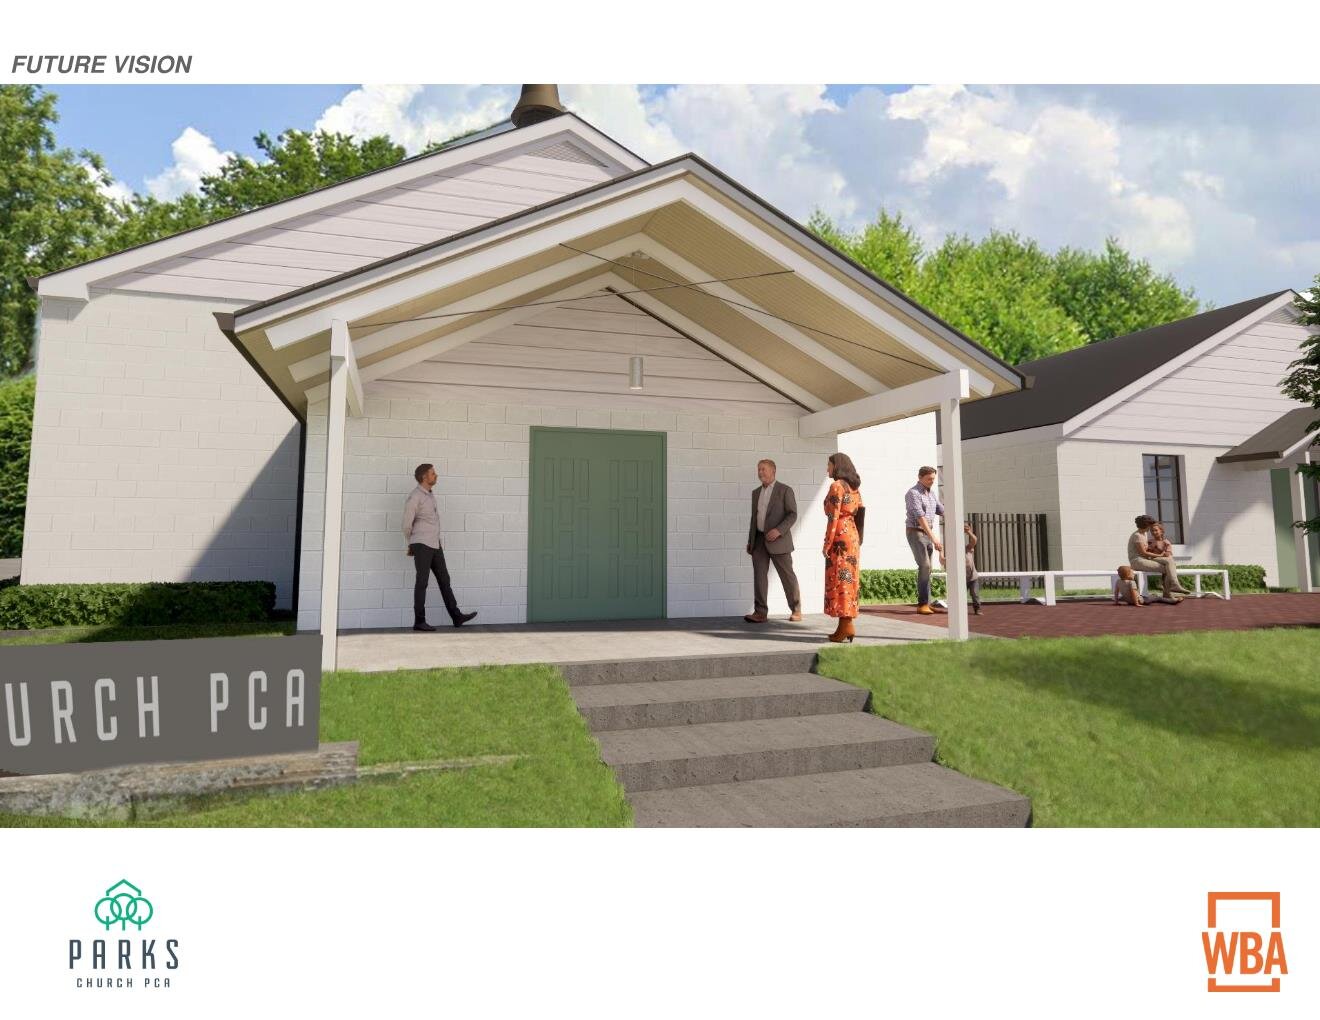 Parks Church_6018 New York Ave Future Vision Page 002.jpg